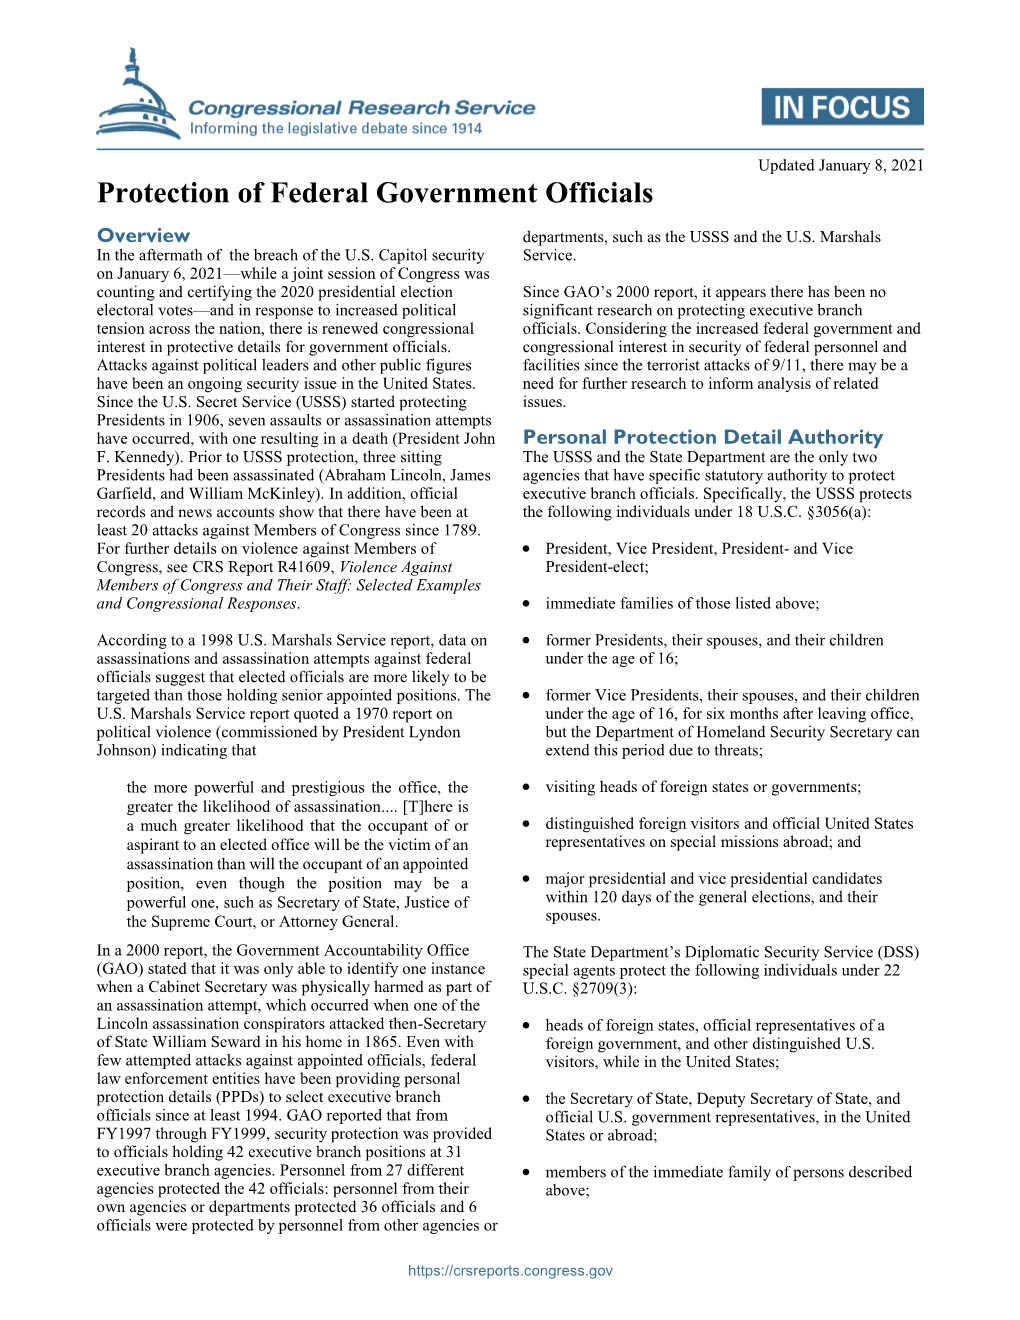 Protection of Federal Government Officials